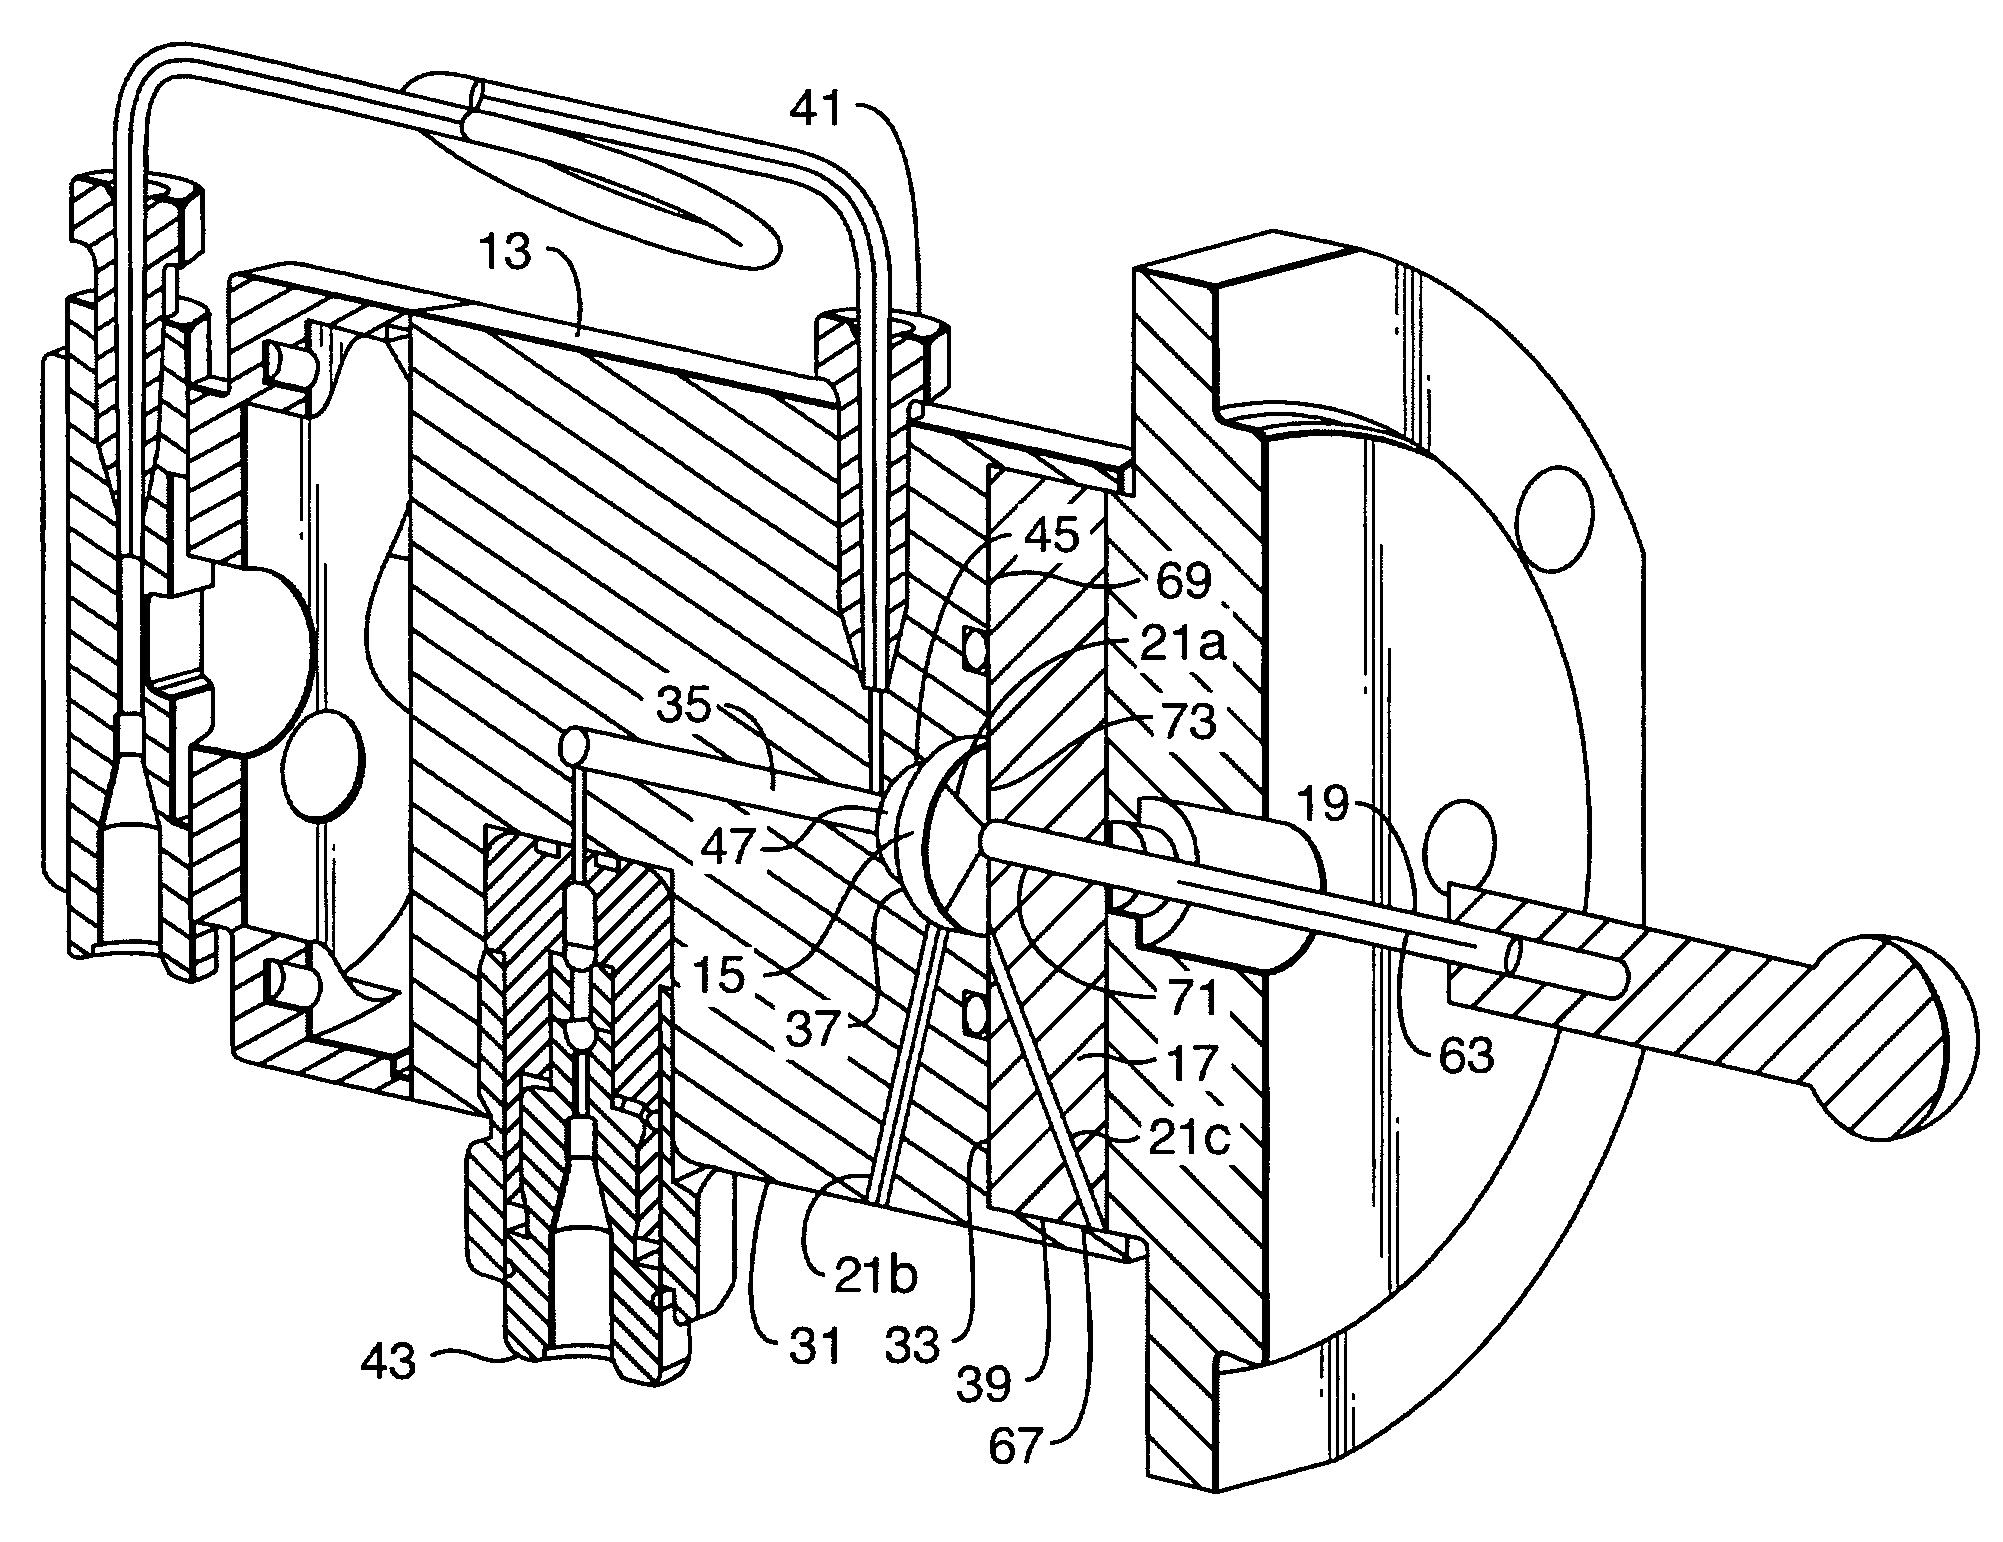 Defined leak path for high pressure seal